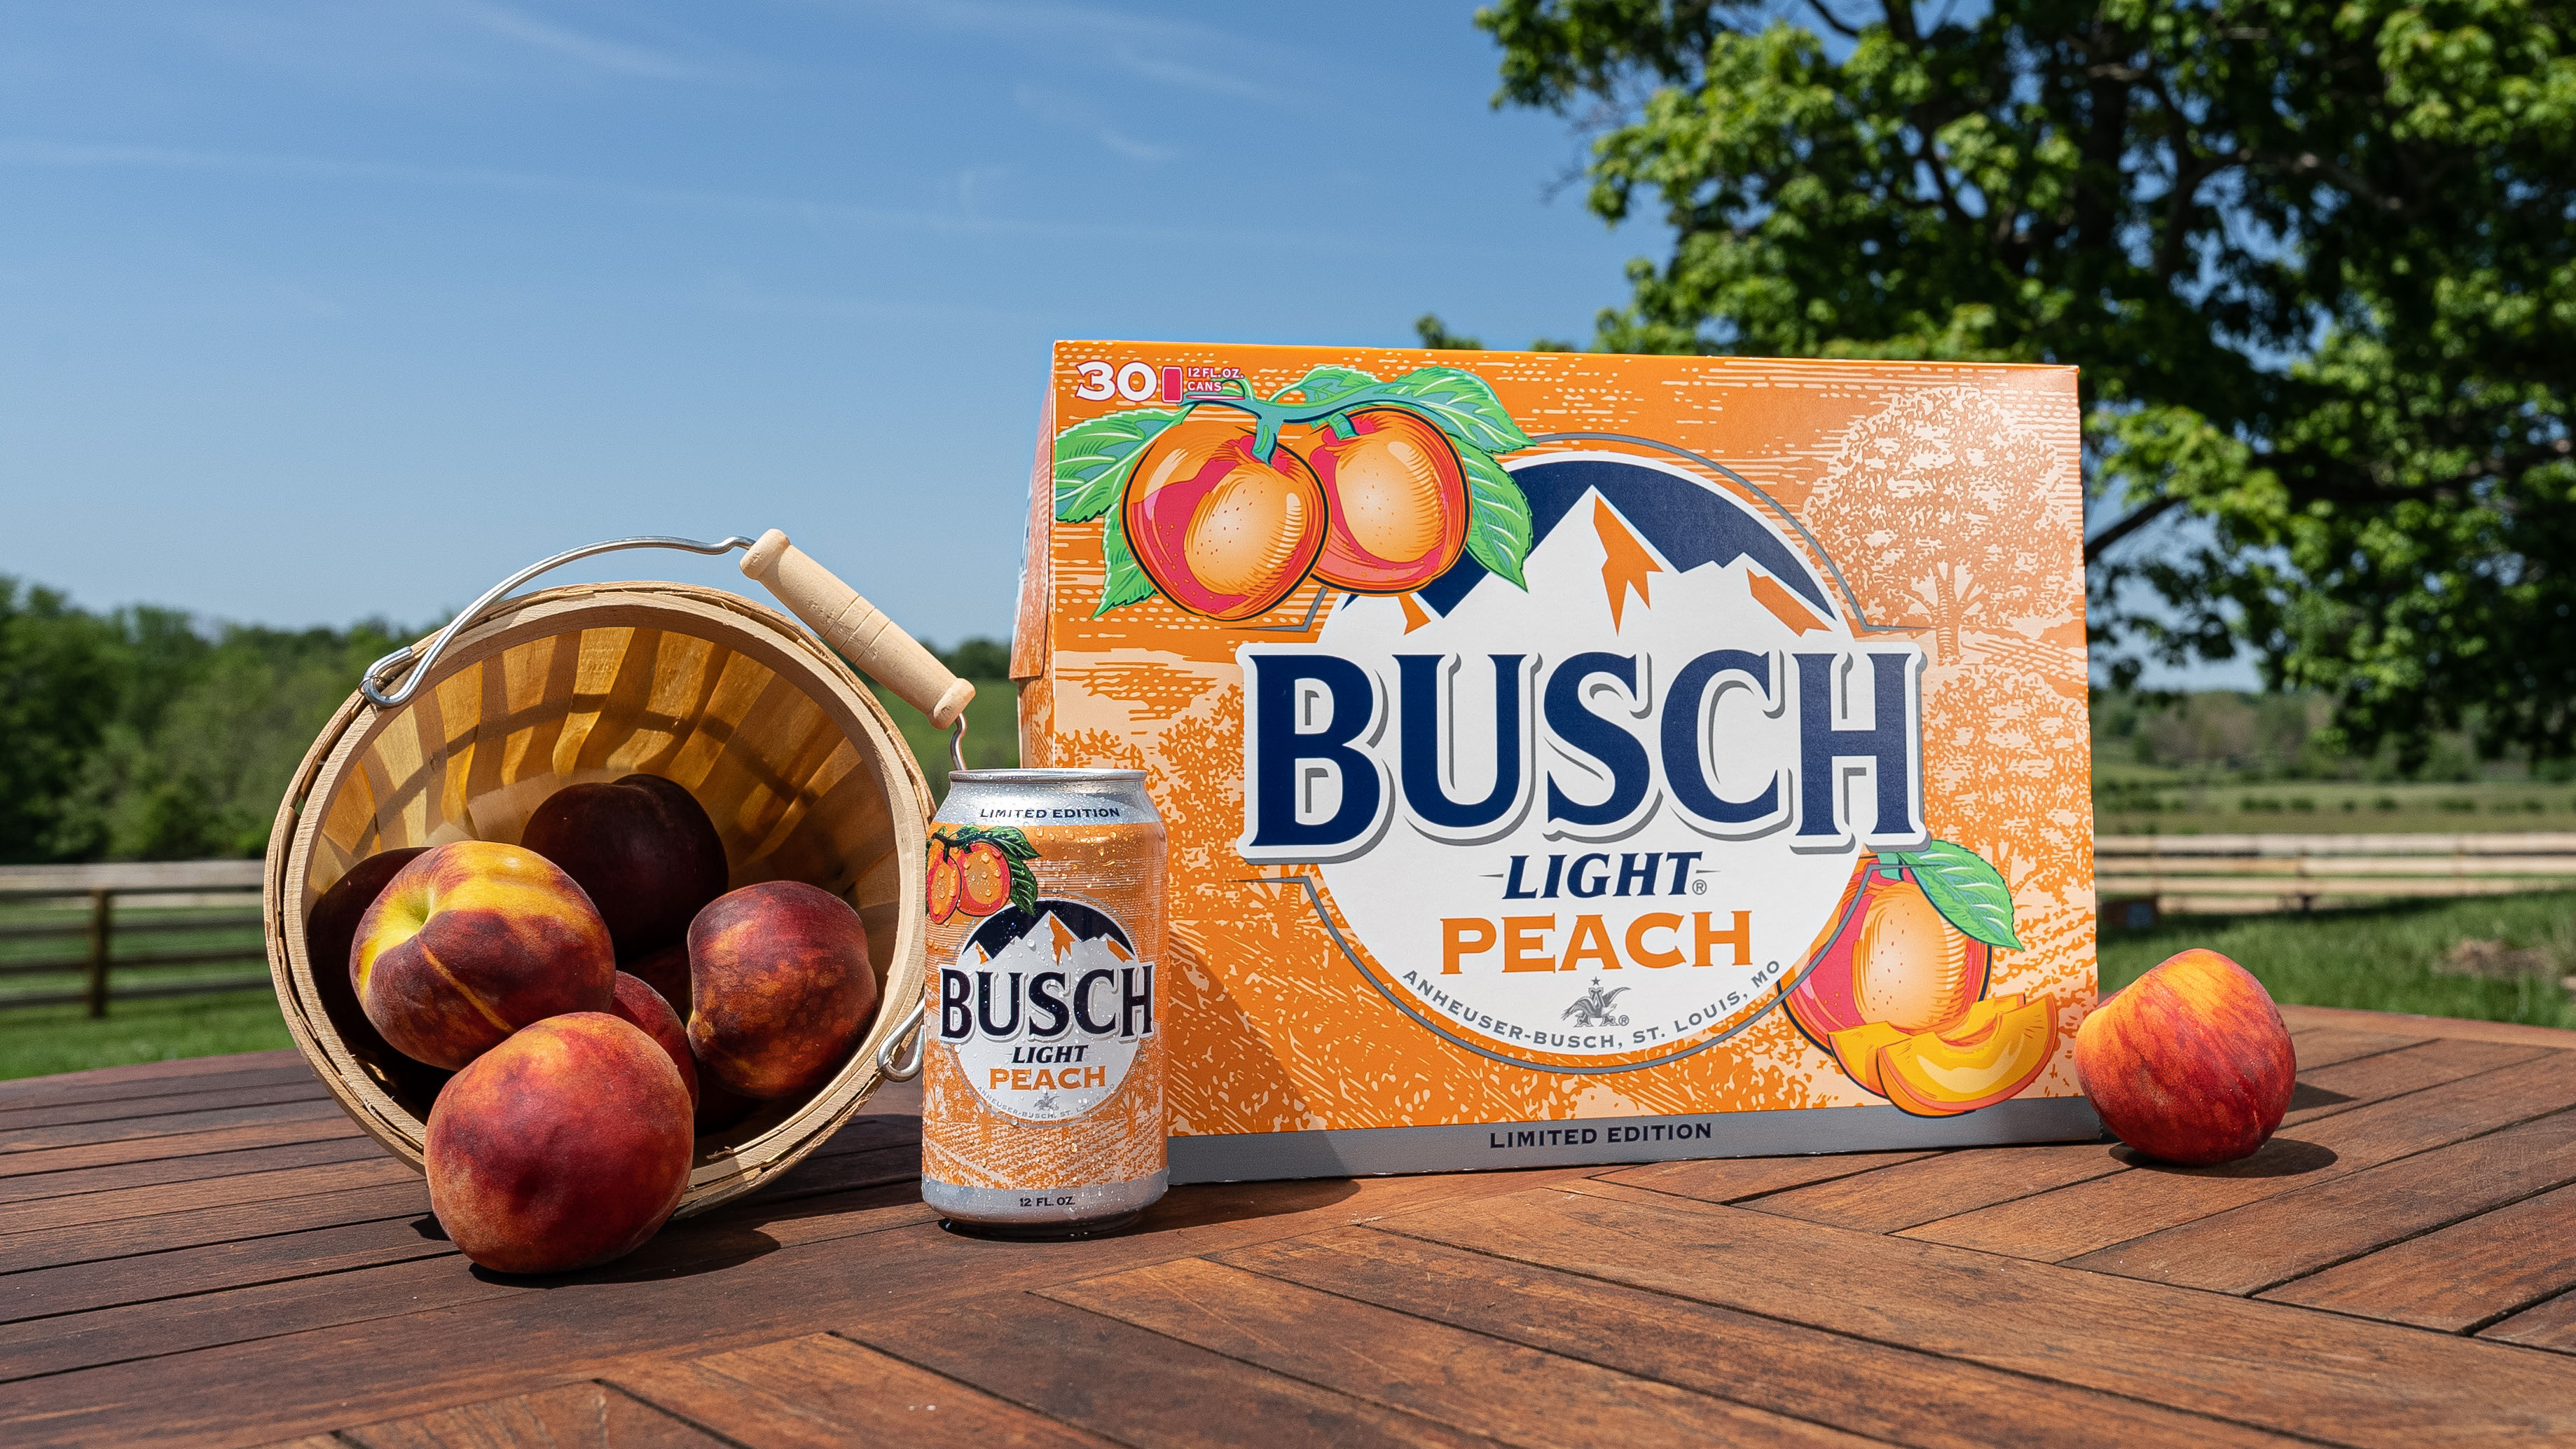 Busch Light drops second seasonal lager flavor and it's just